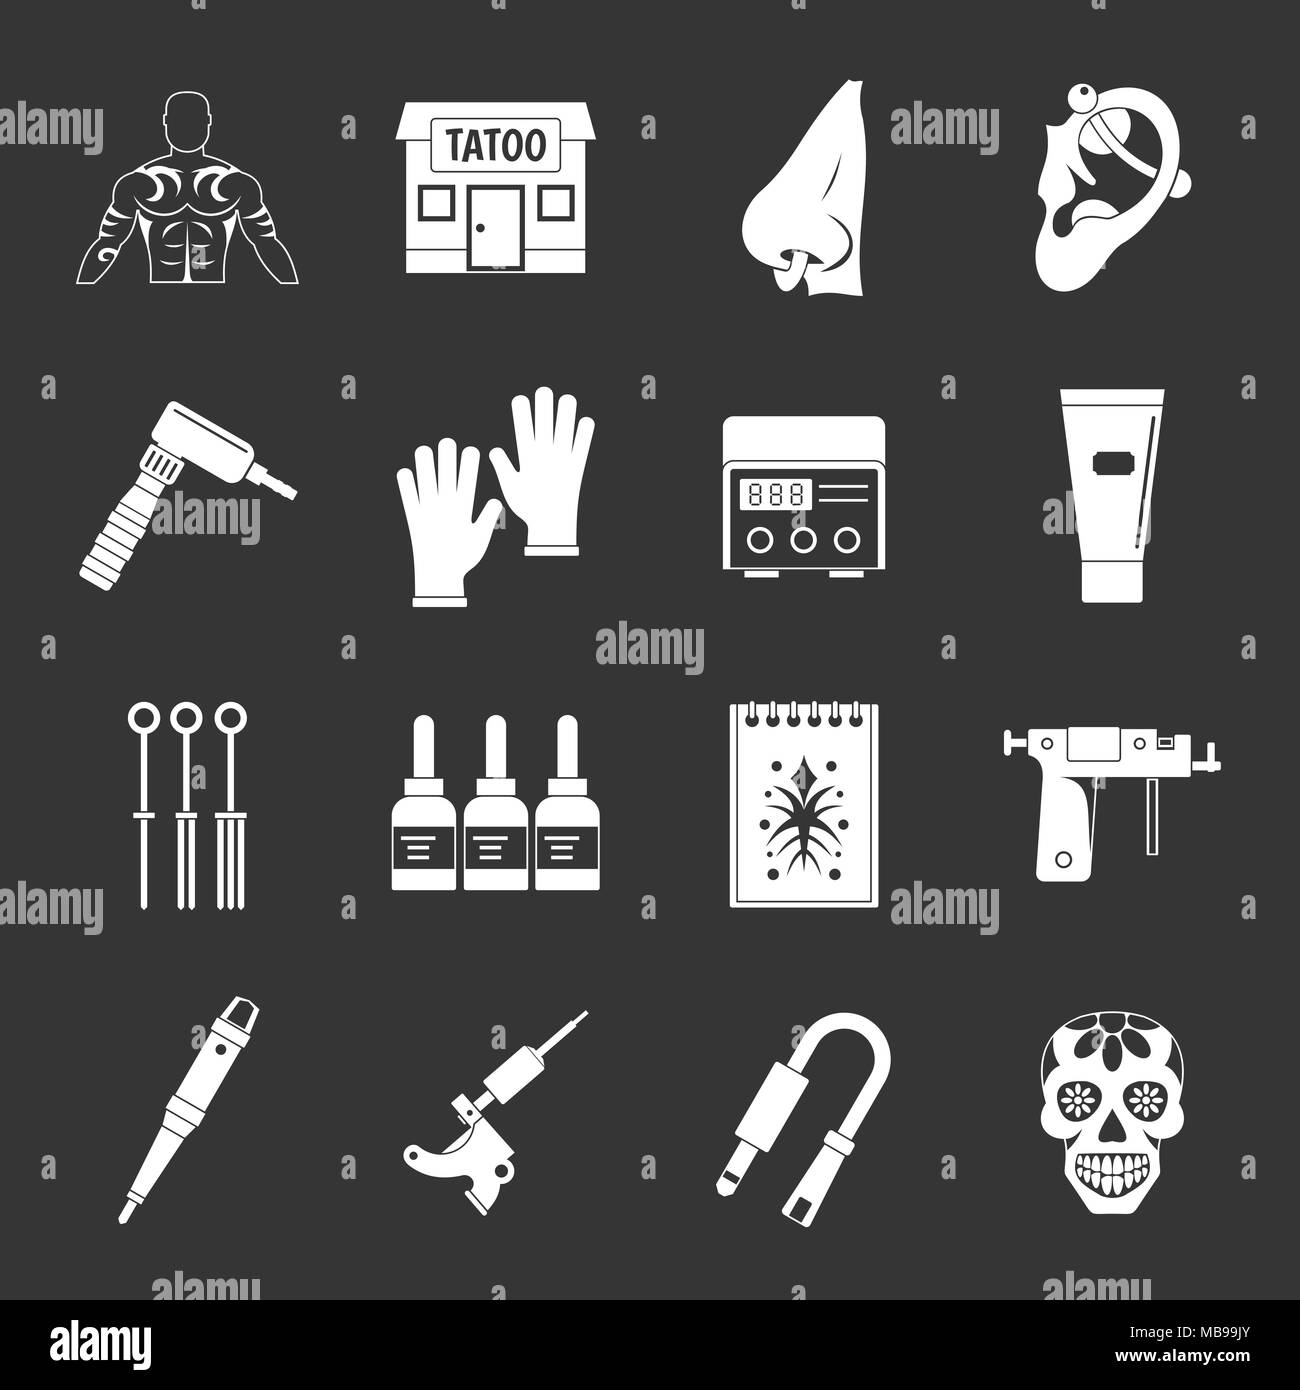 Tattoo parlor icons set grey vector Stock Vector